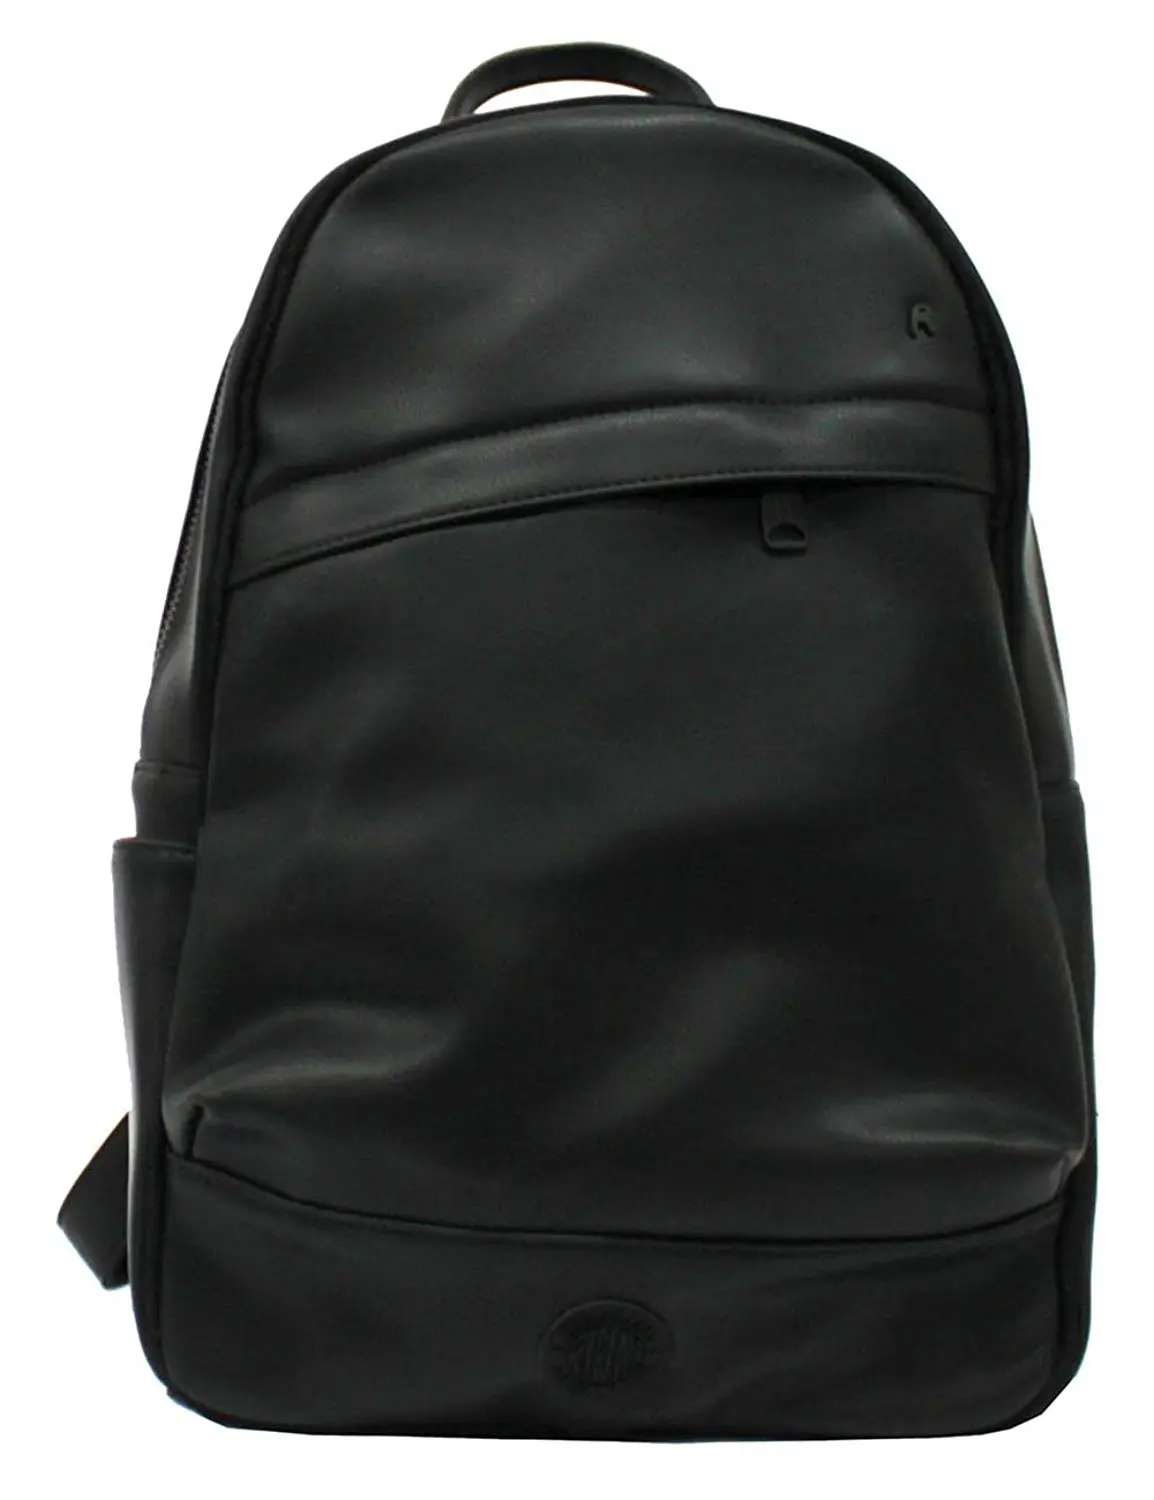 Cheap Backpack Brown, find Backpack Brown deals on line at Alibaba.com